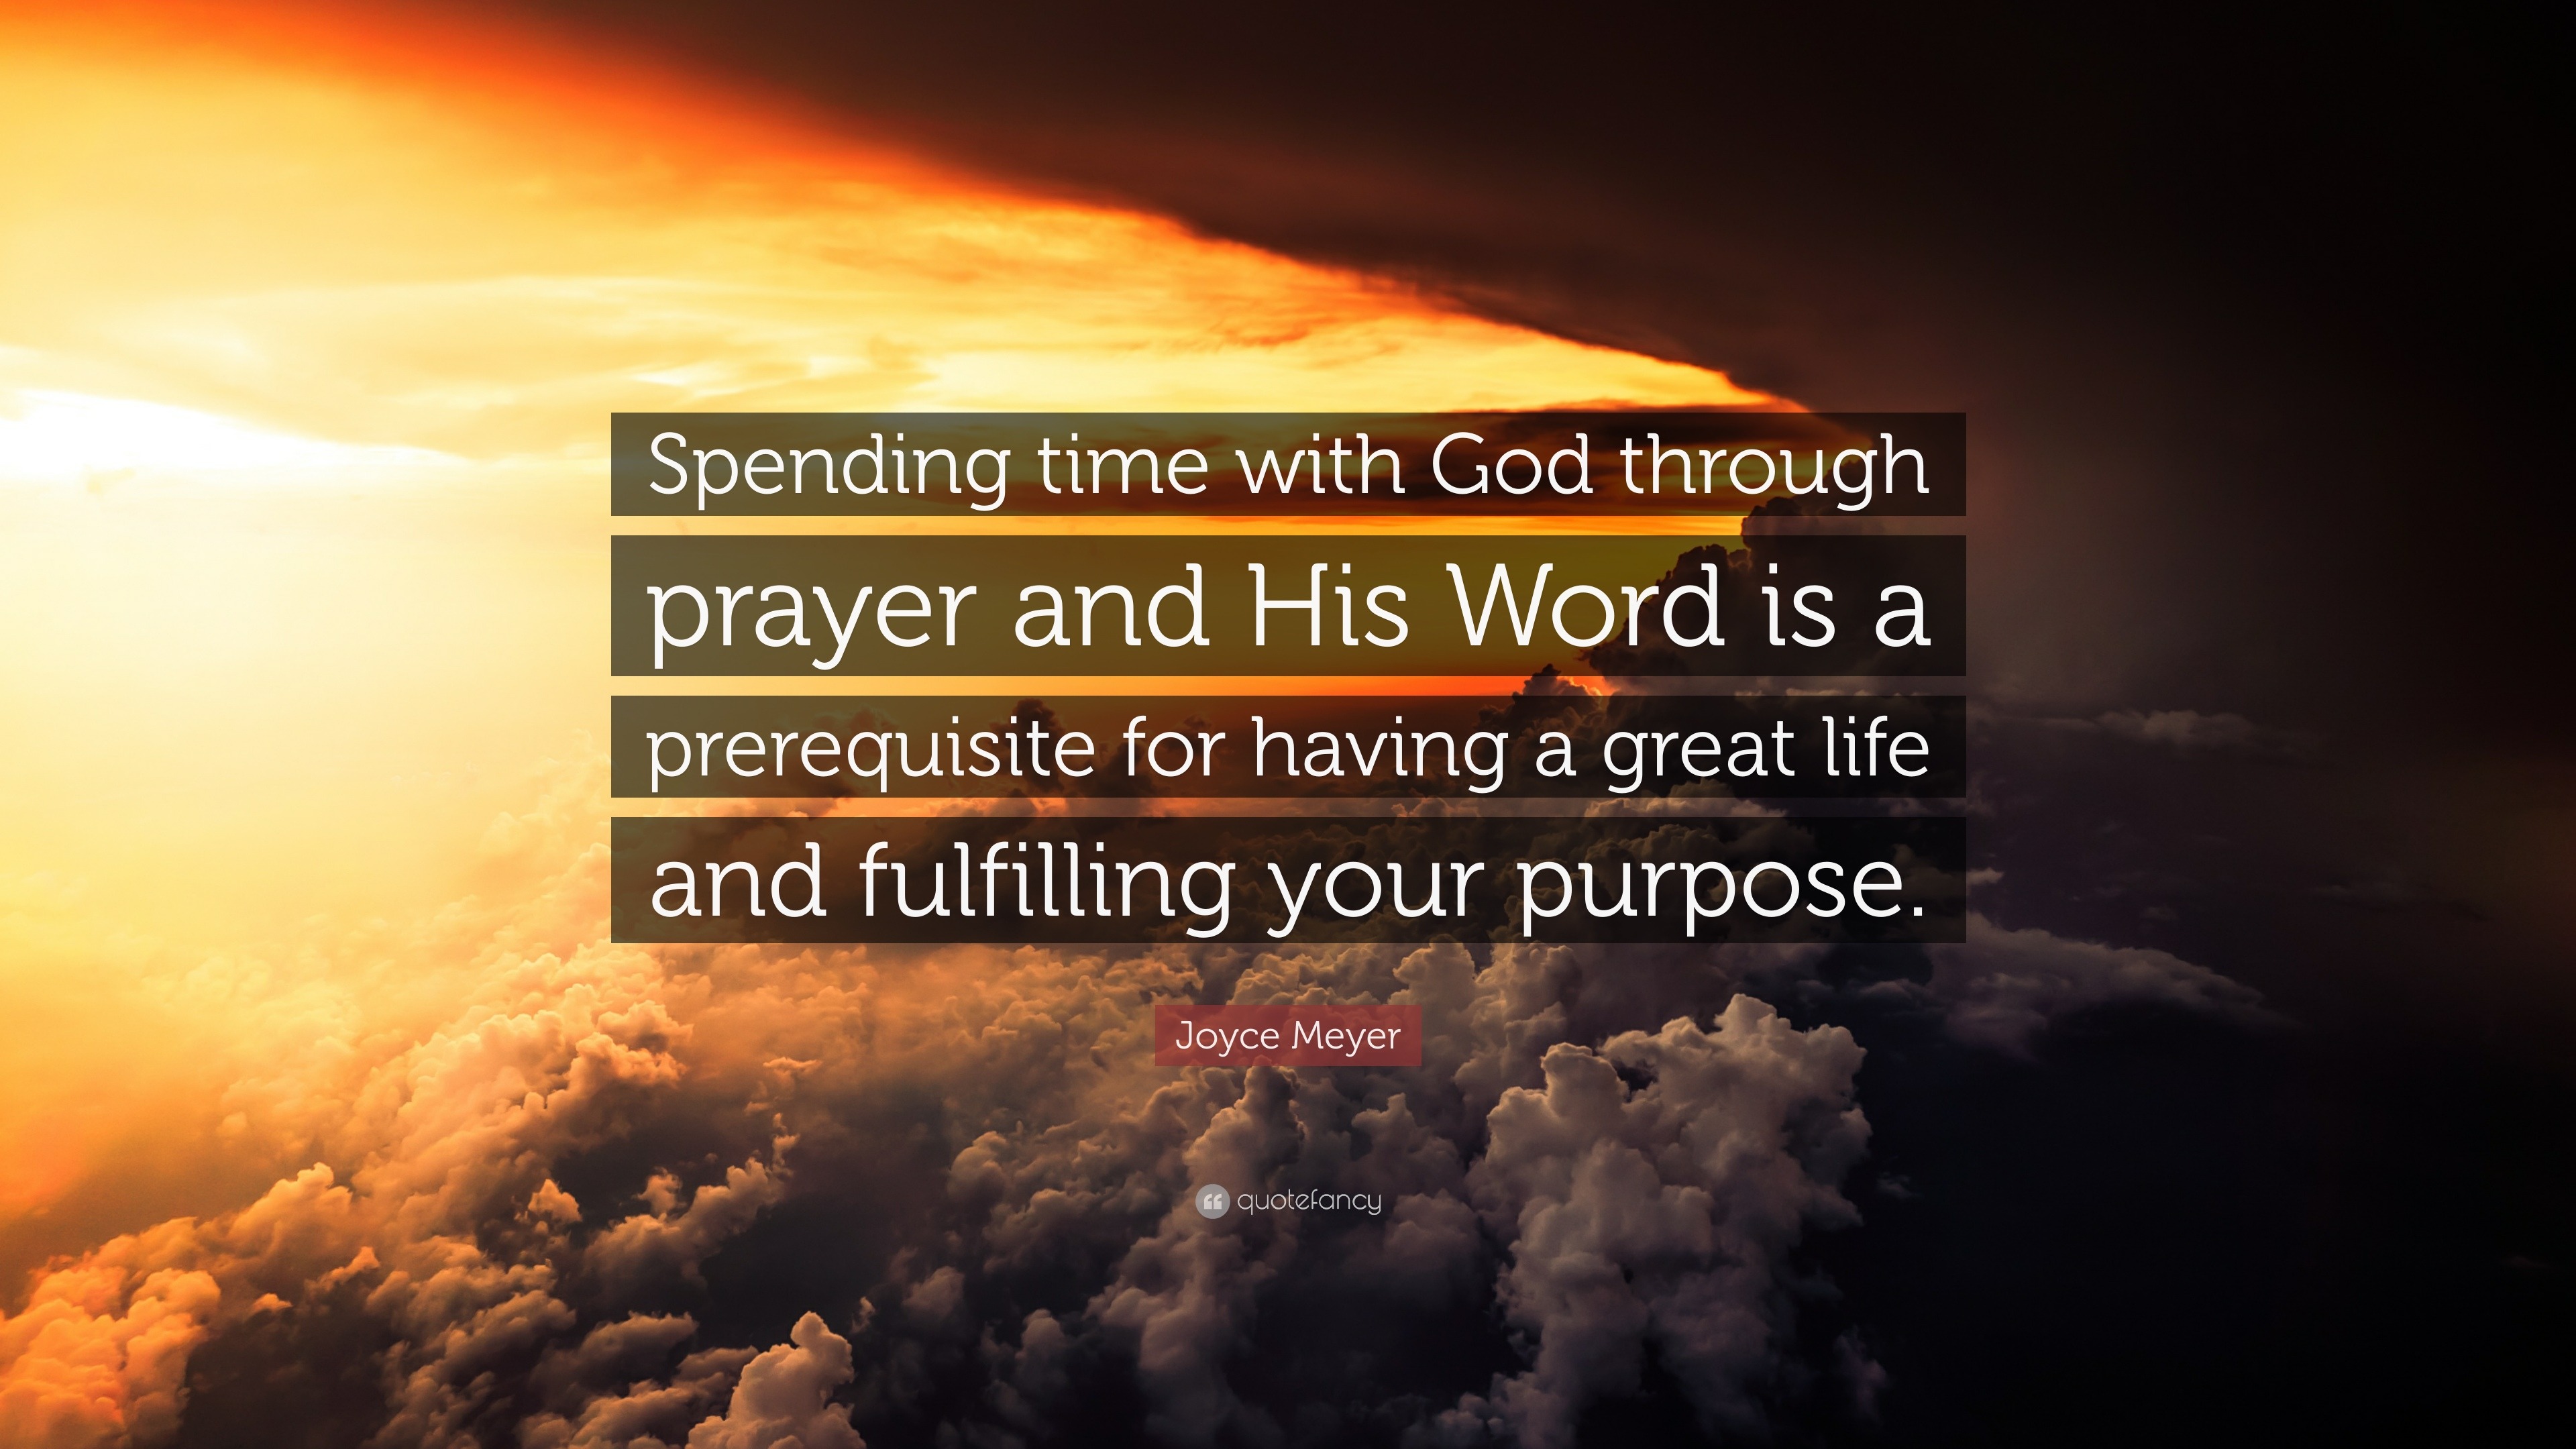 Joyce Meyer Quote “spending Time With God Through Prayer And His Word